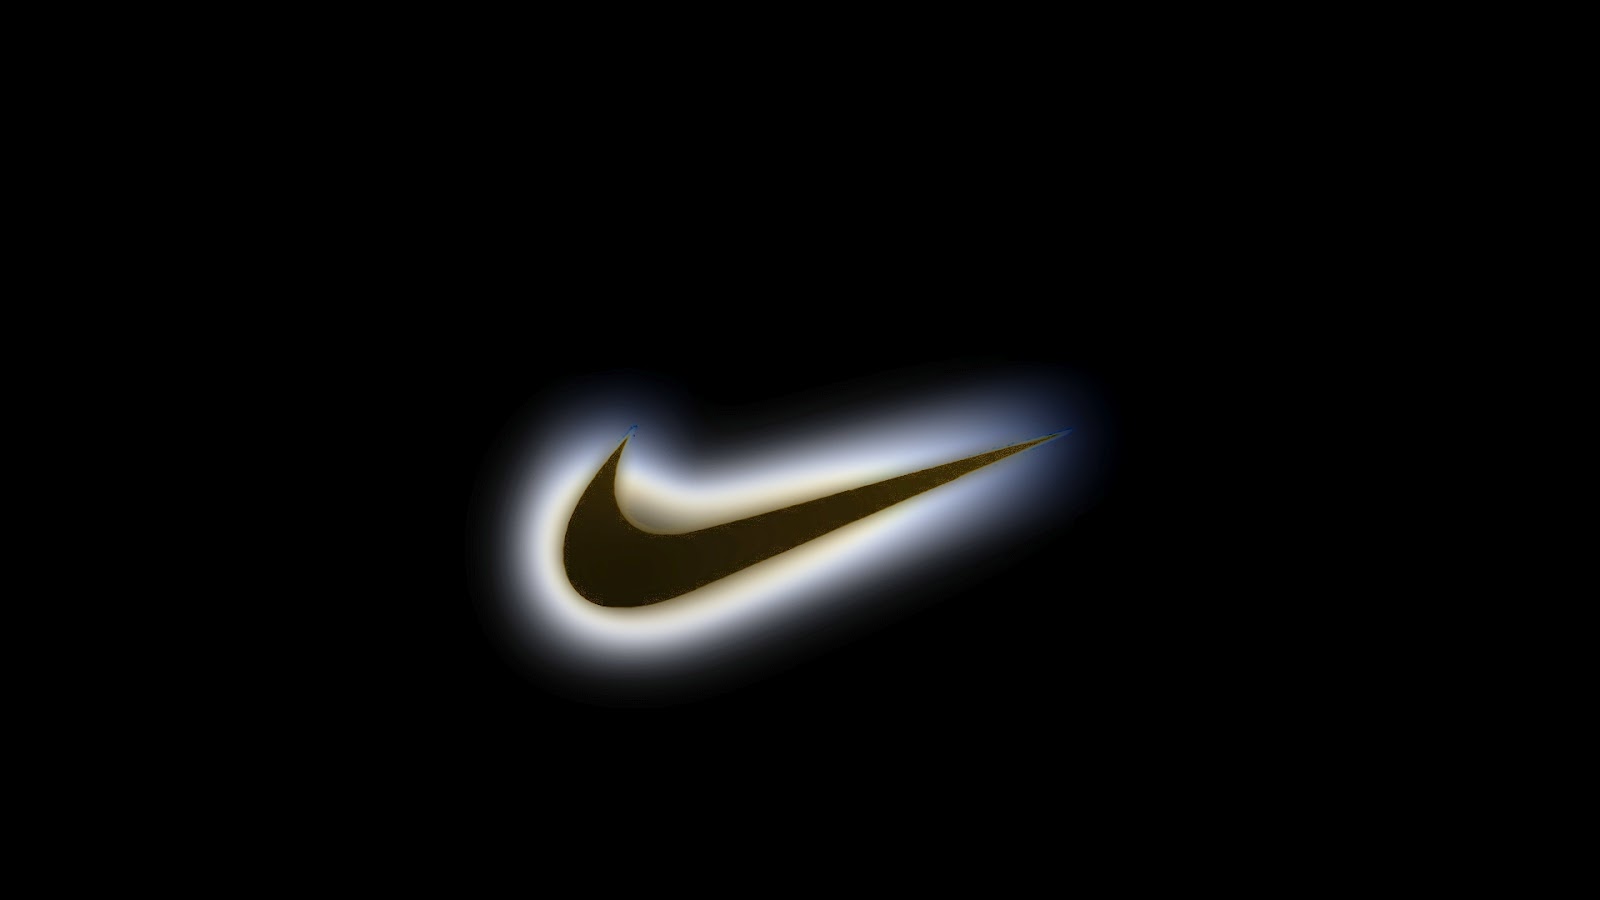 Great Nike logo Wallpapers Full HD Pictures